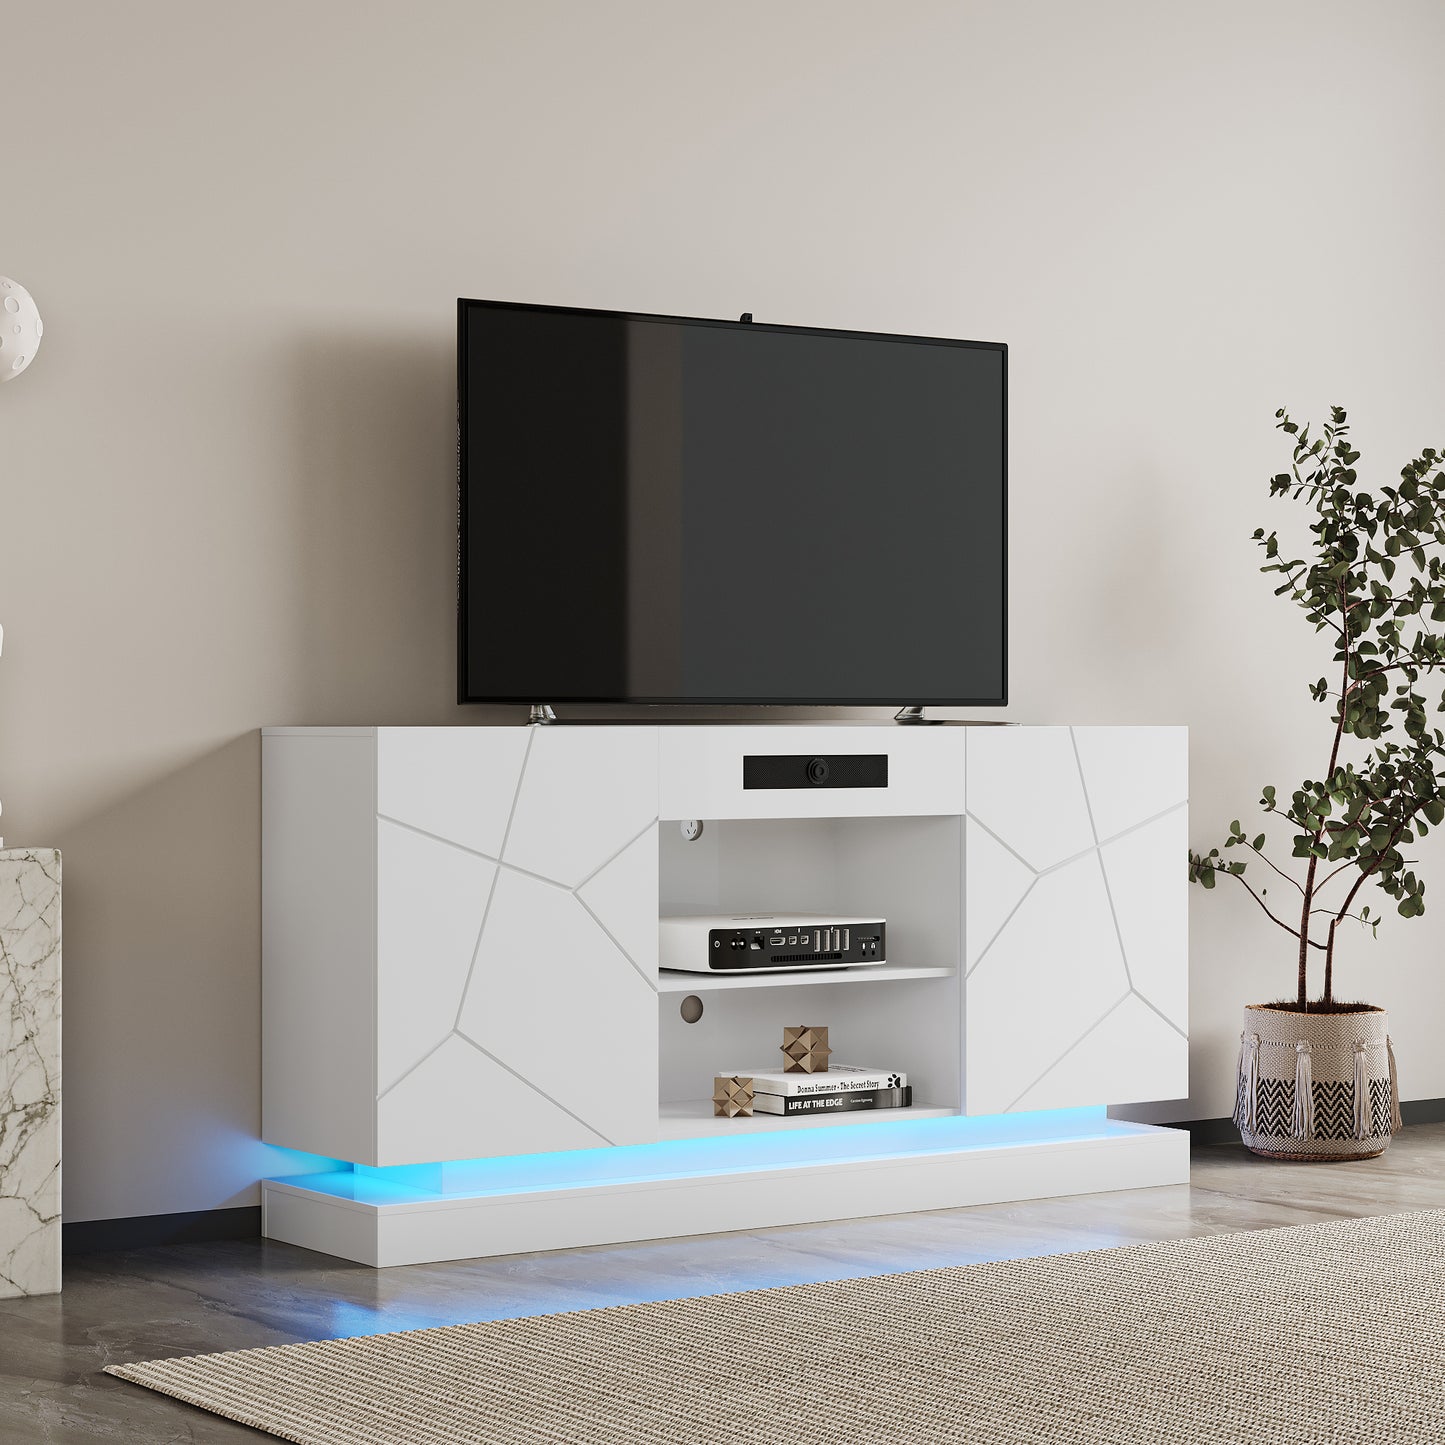 TV Cabinet , TV Stand with bluetooth speaker , Modern LED TV Cabinet with Storage Drawers, Living Room Entertainment Center Media Console Table